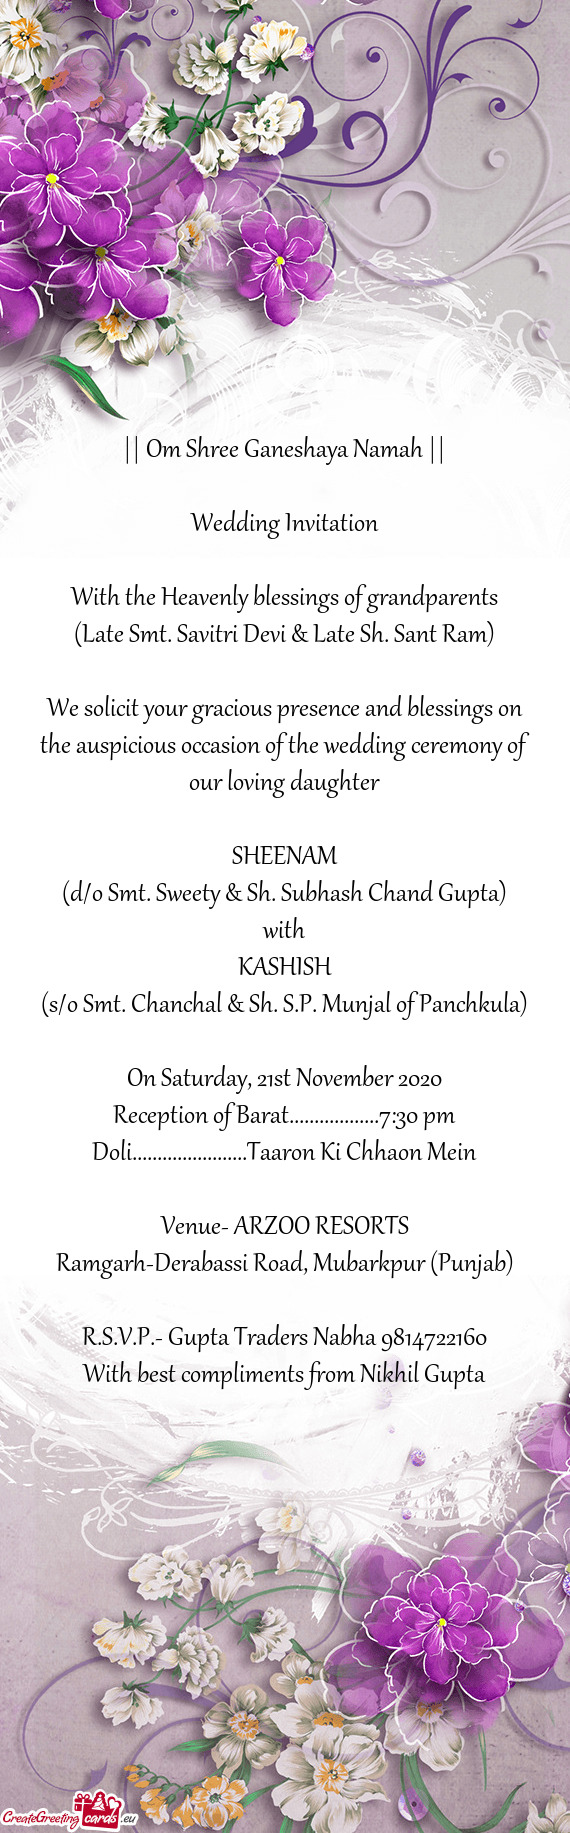 We solicit your gracious presence and blessings on the auspicious occasion of the wedding ceremony o